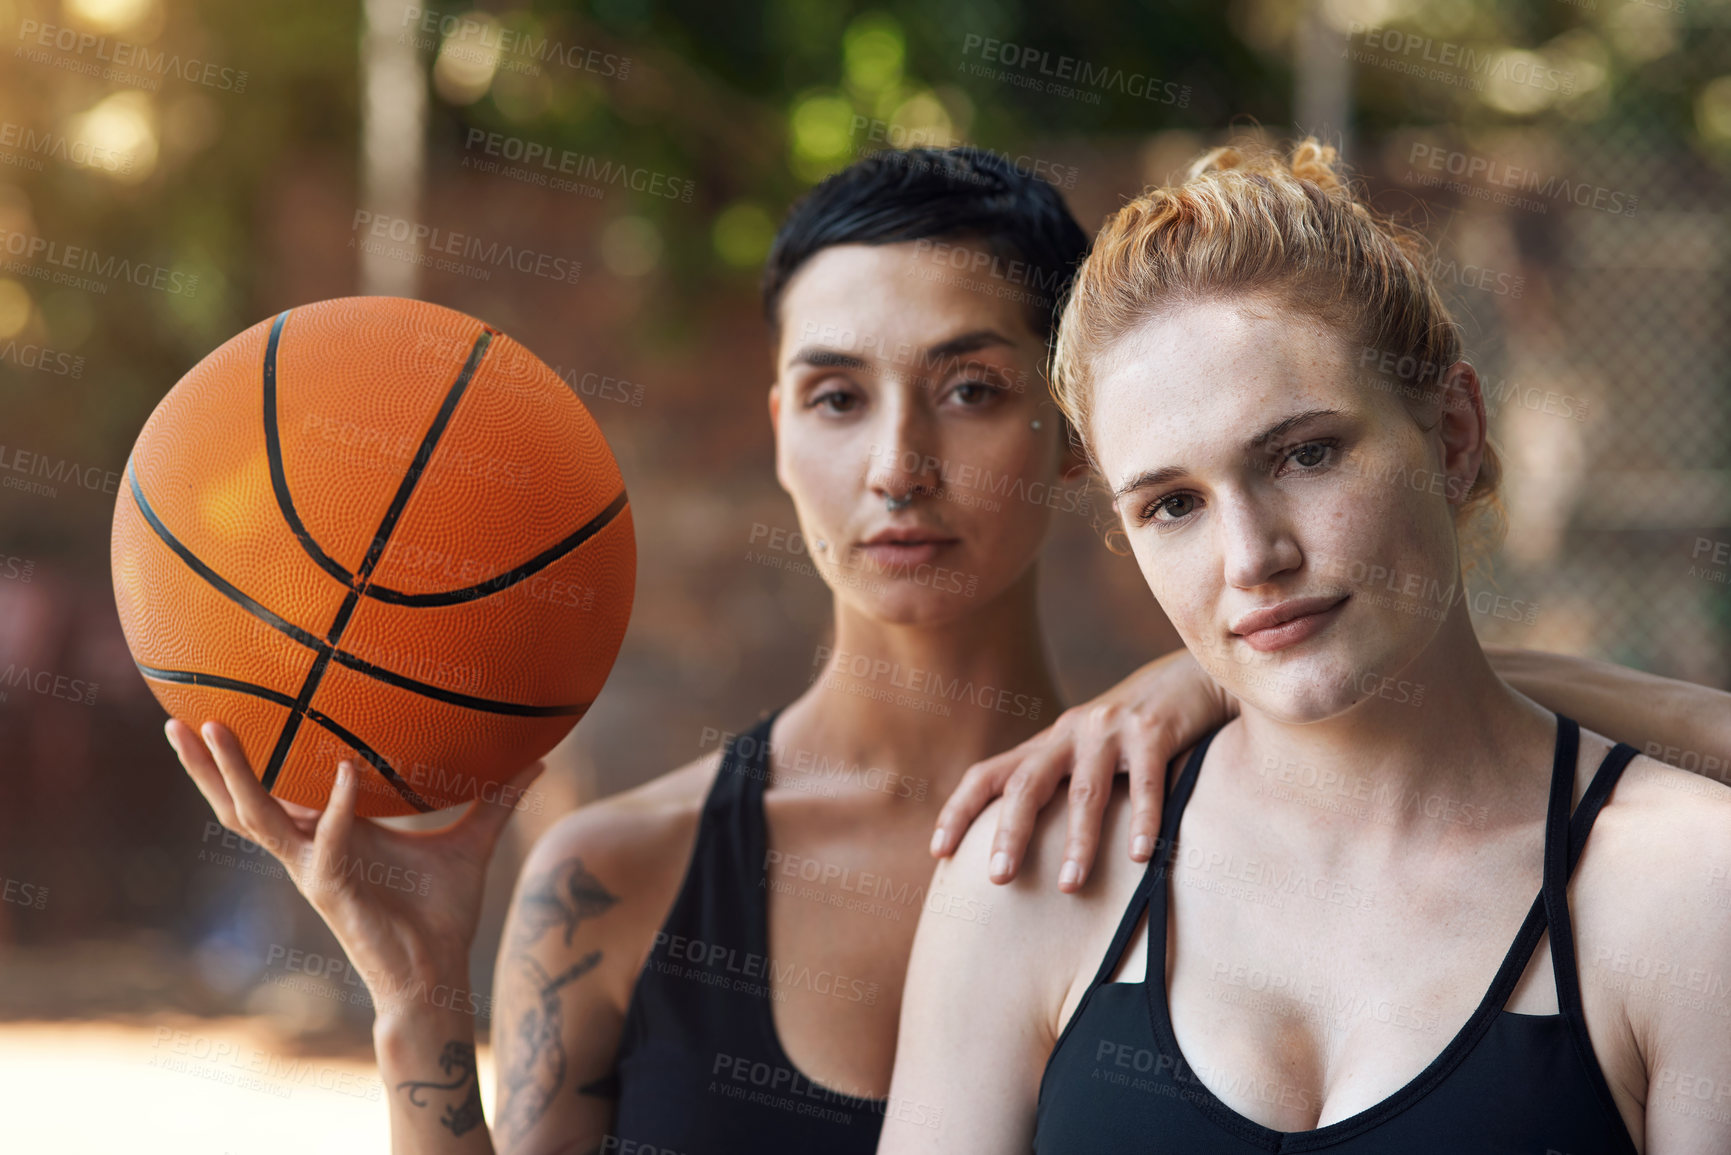 Buy stock photo Cropped portrait of two attractive young female athletes standing together on the basketball court